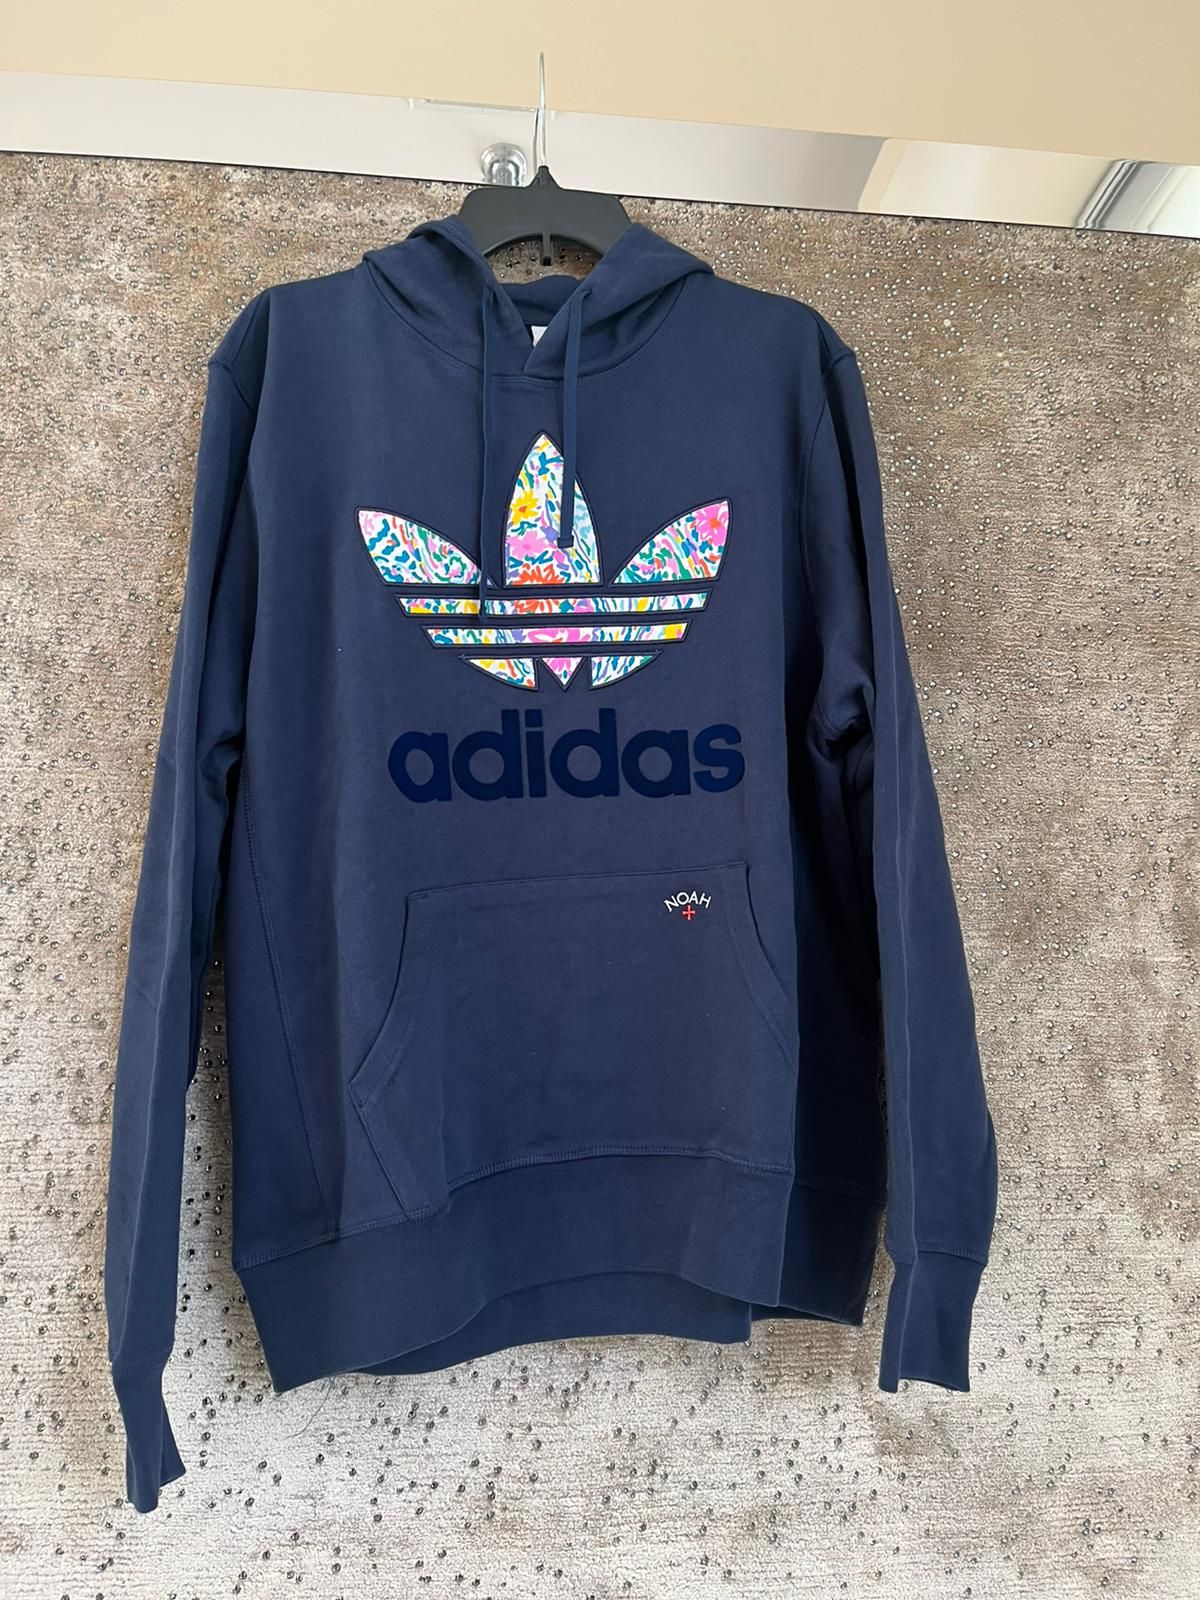 Adidas Logo Hoodie in Blue Size US M / EU 48-50 / 2 - 1 Preview